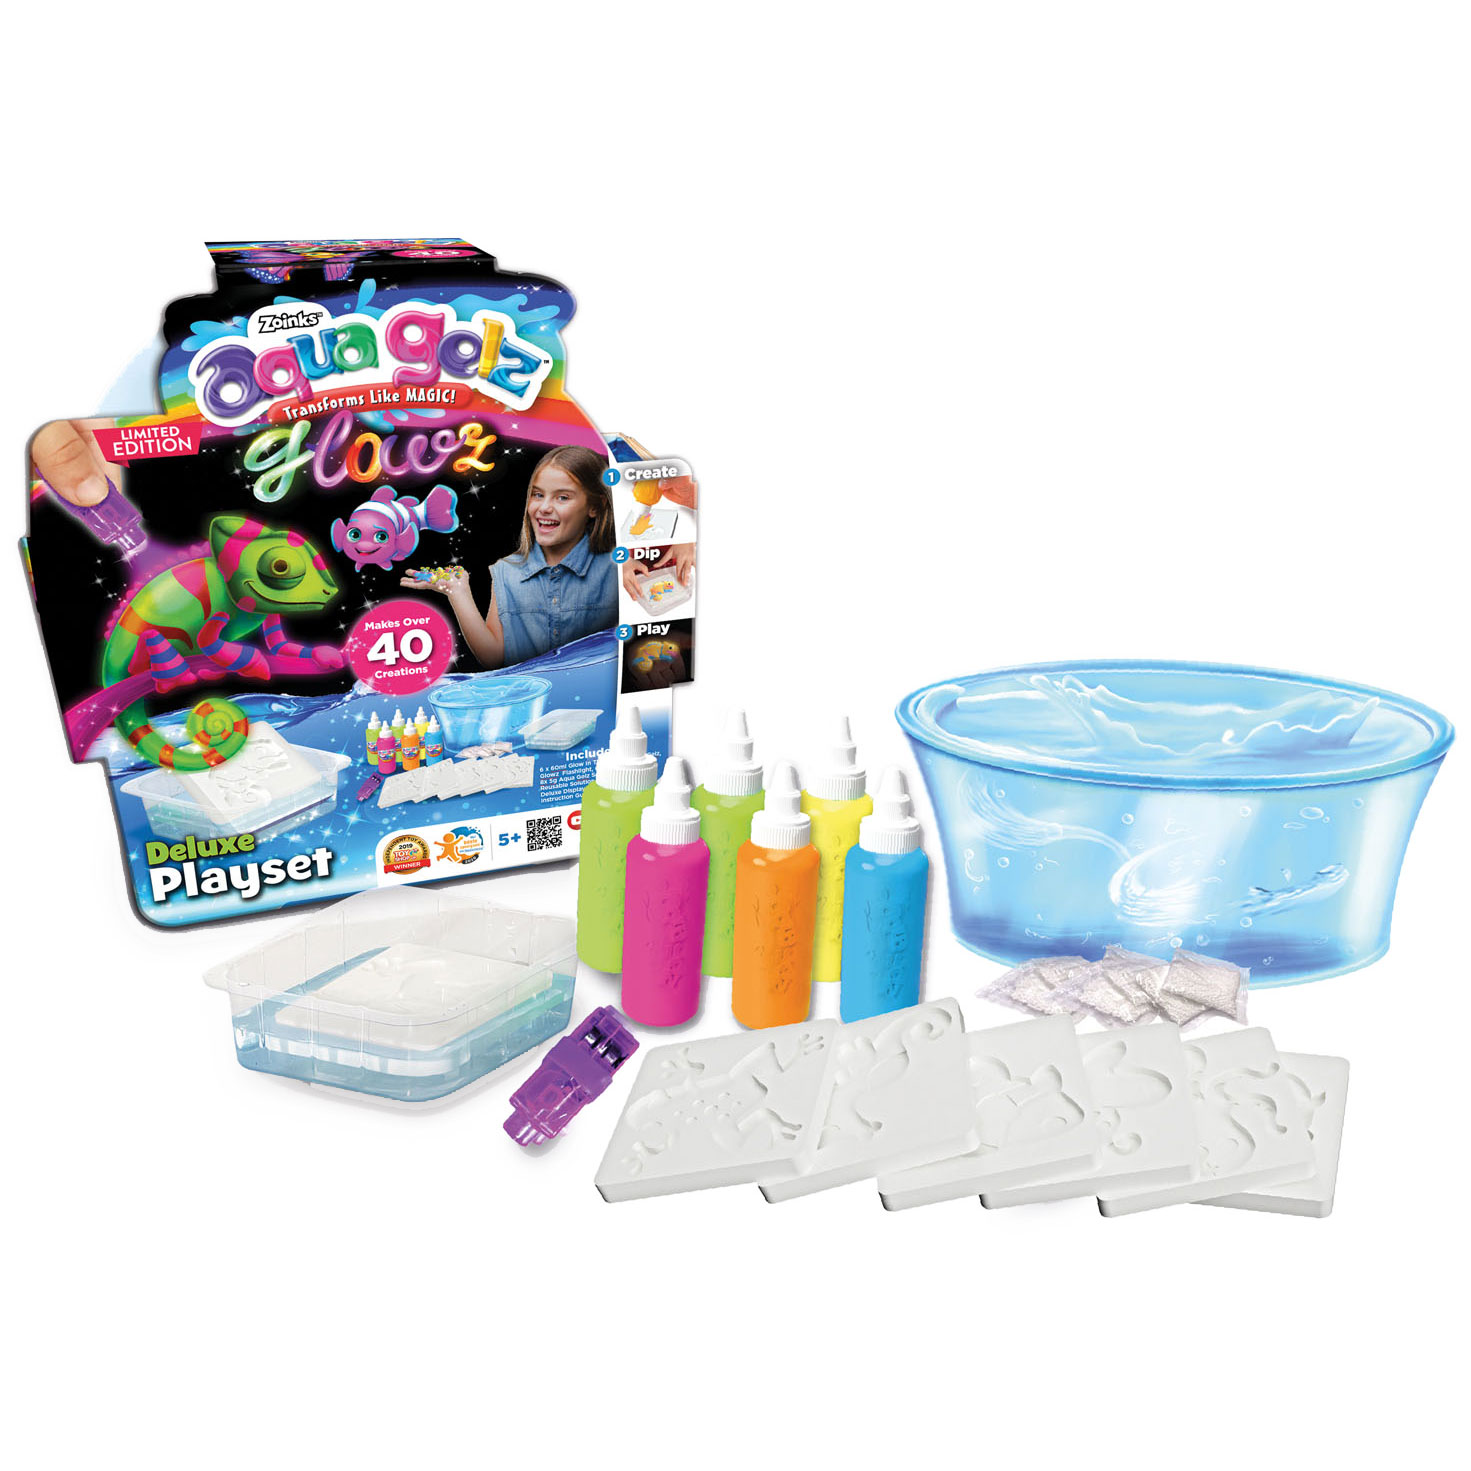 Aqua Gelz Deluxe Playset  Unboxing and Toy Review 